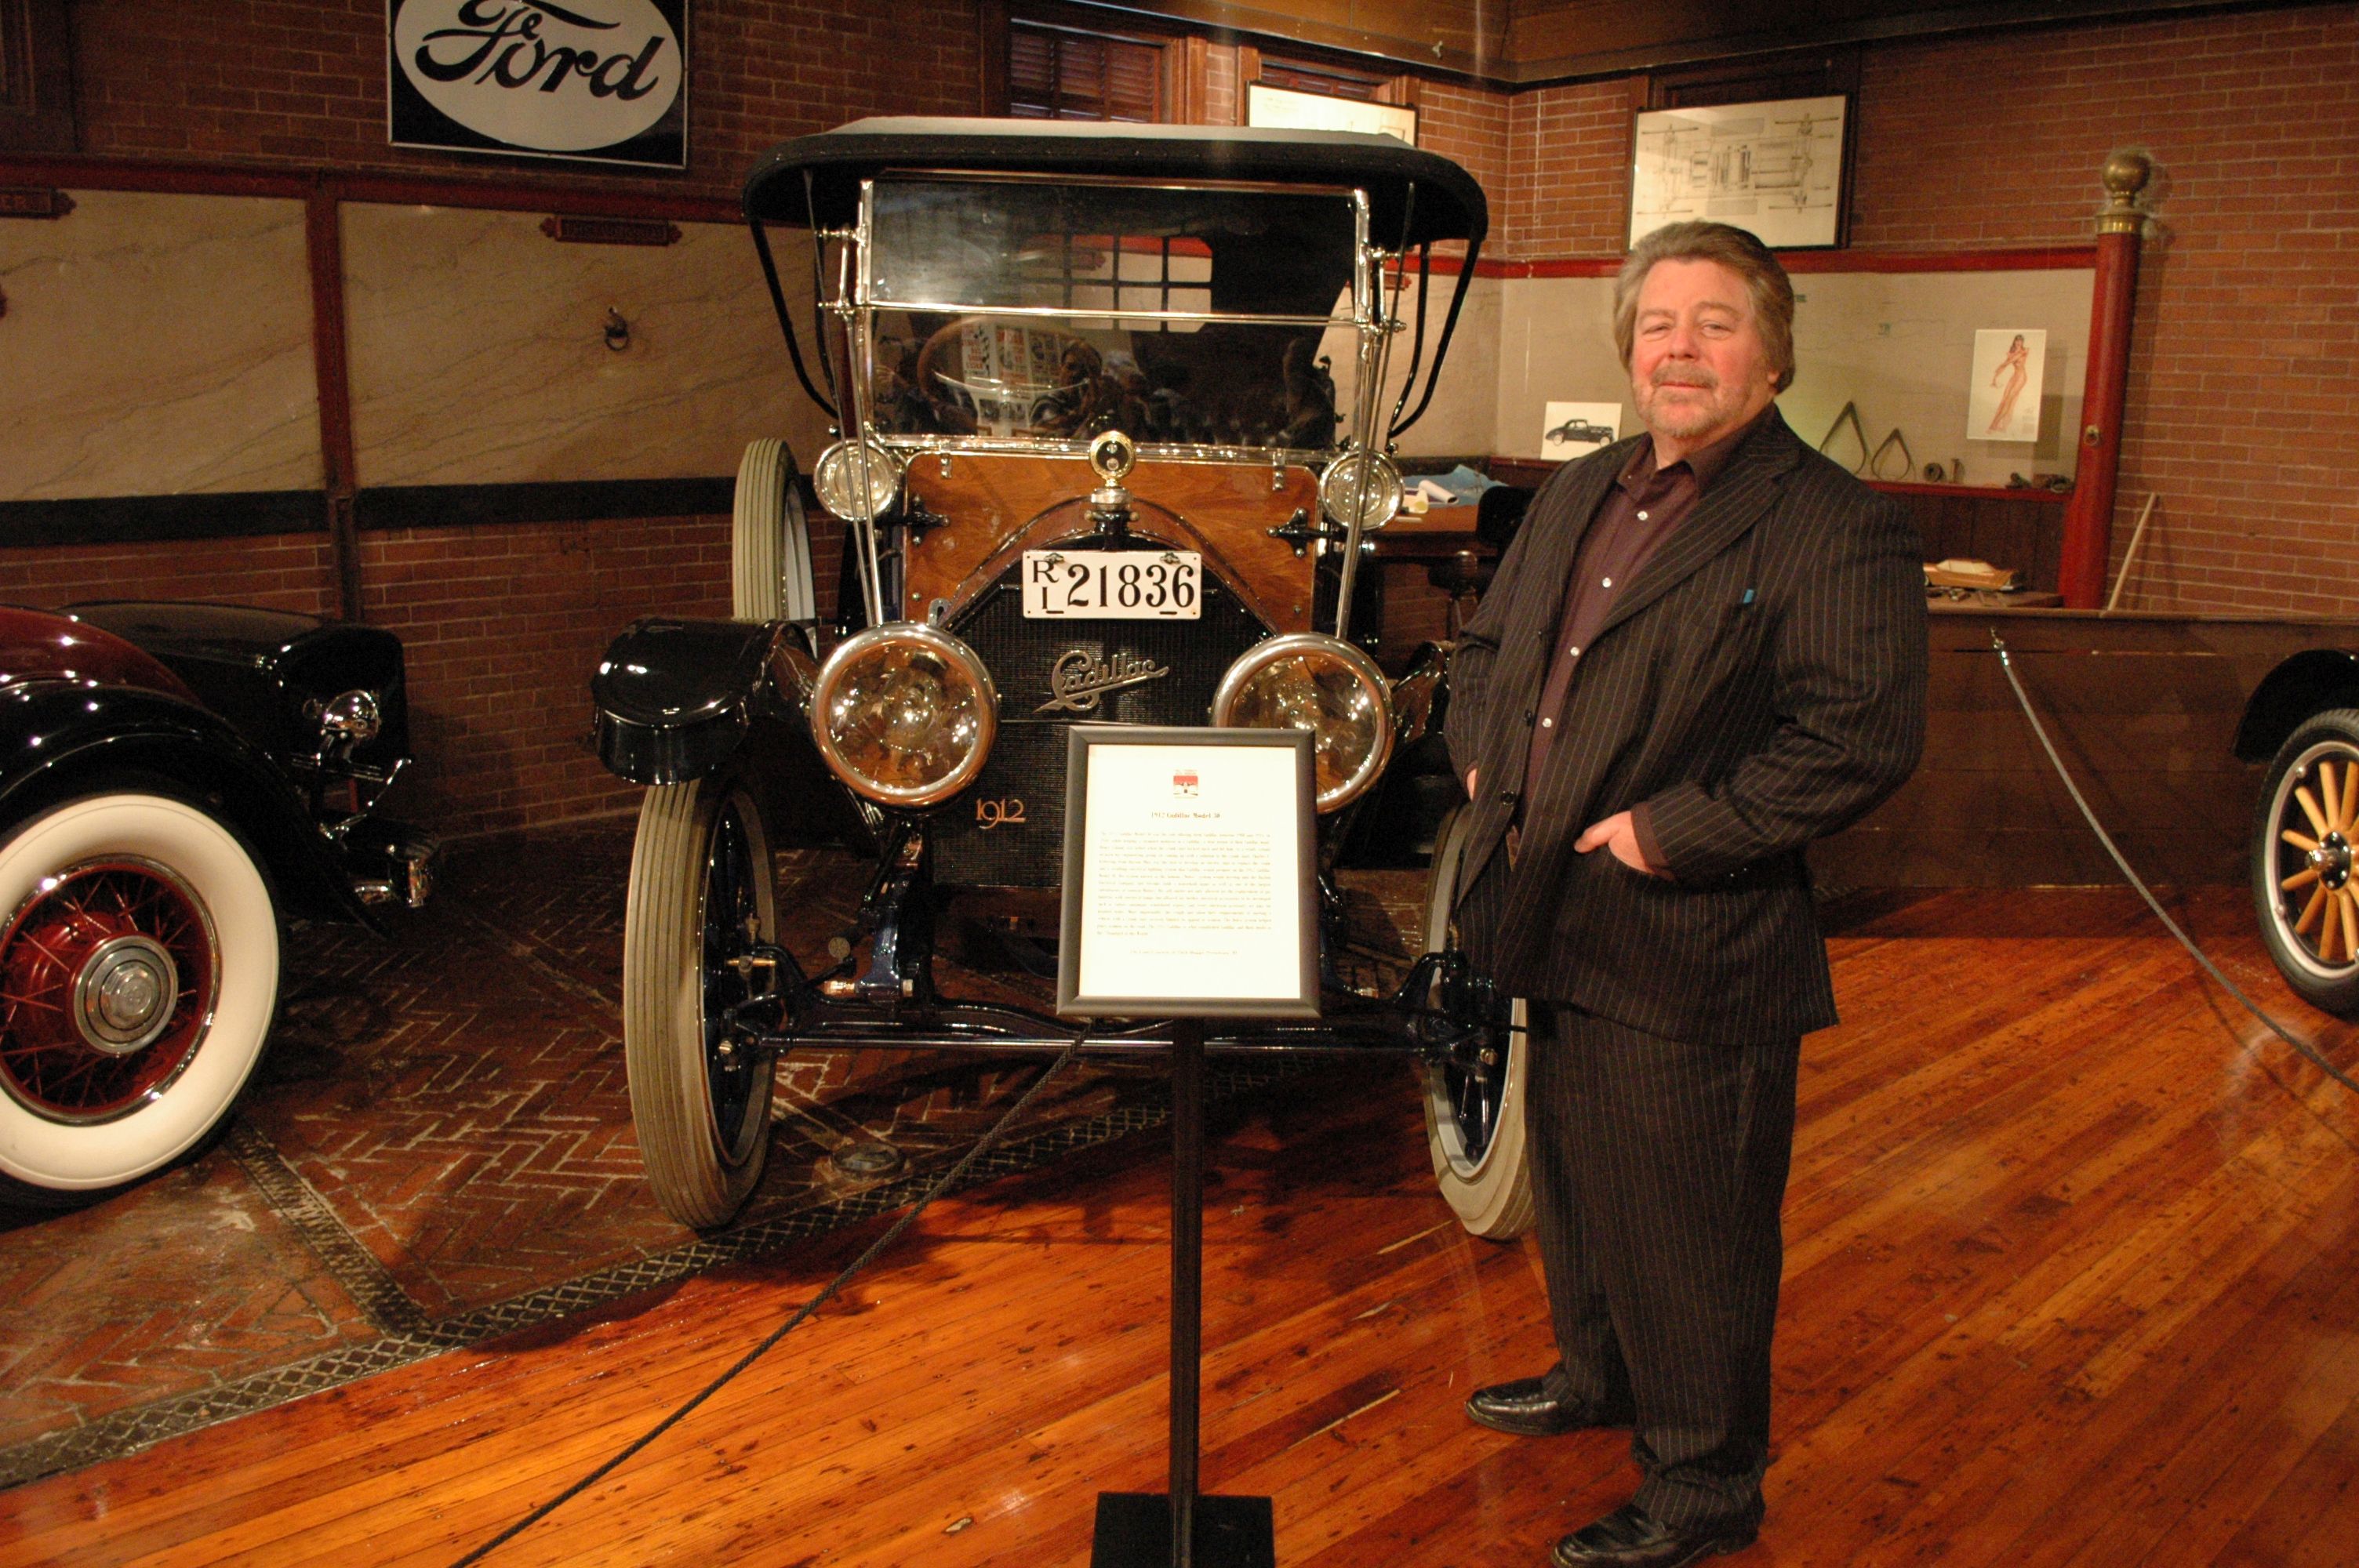 Dick posing with his 1912 Cadillac